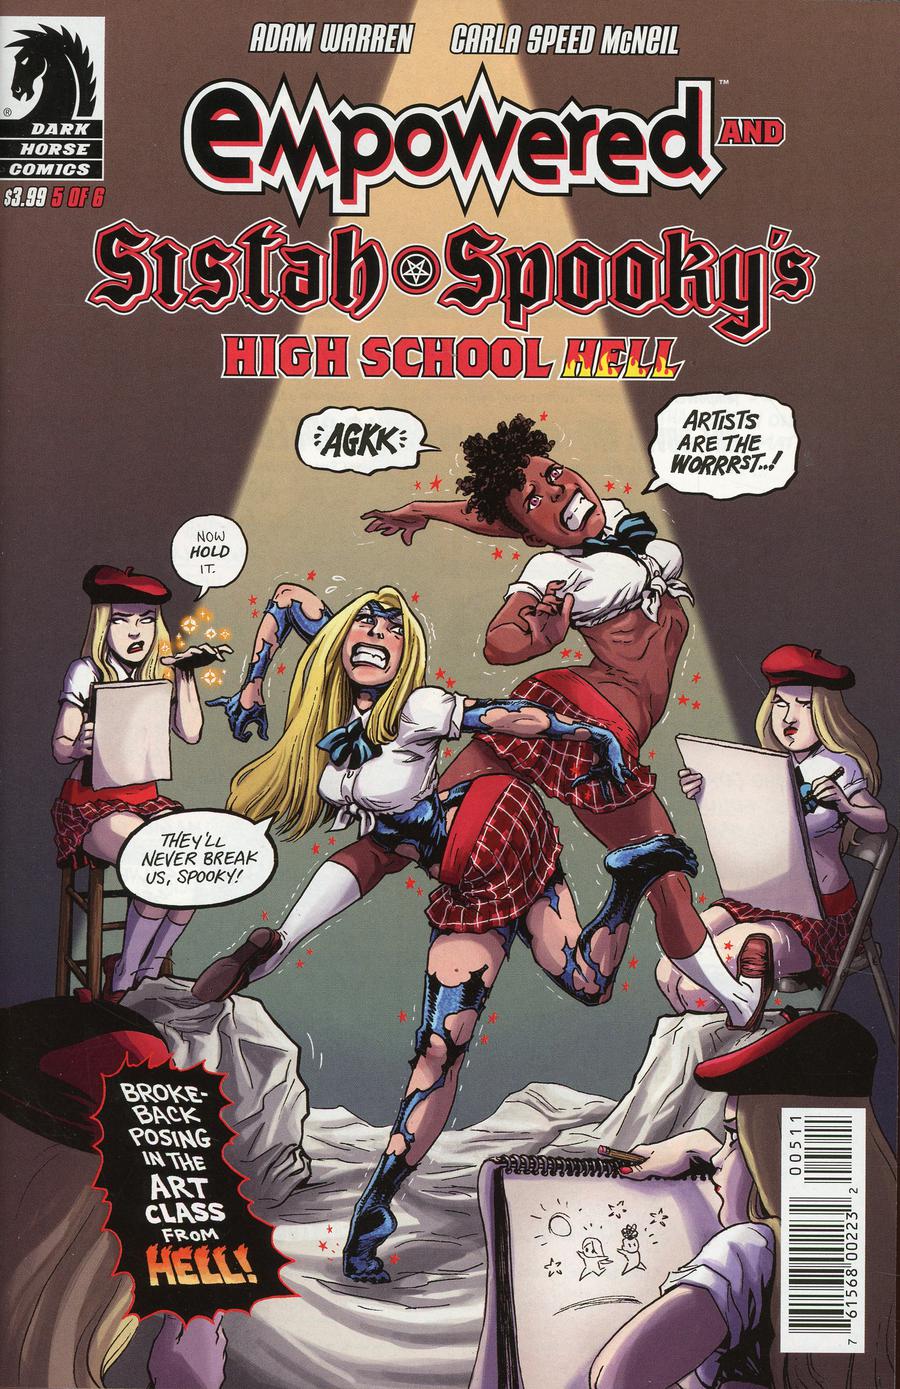 Empowered And Sistah Spookys High School Hell #5